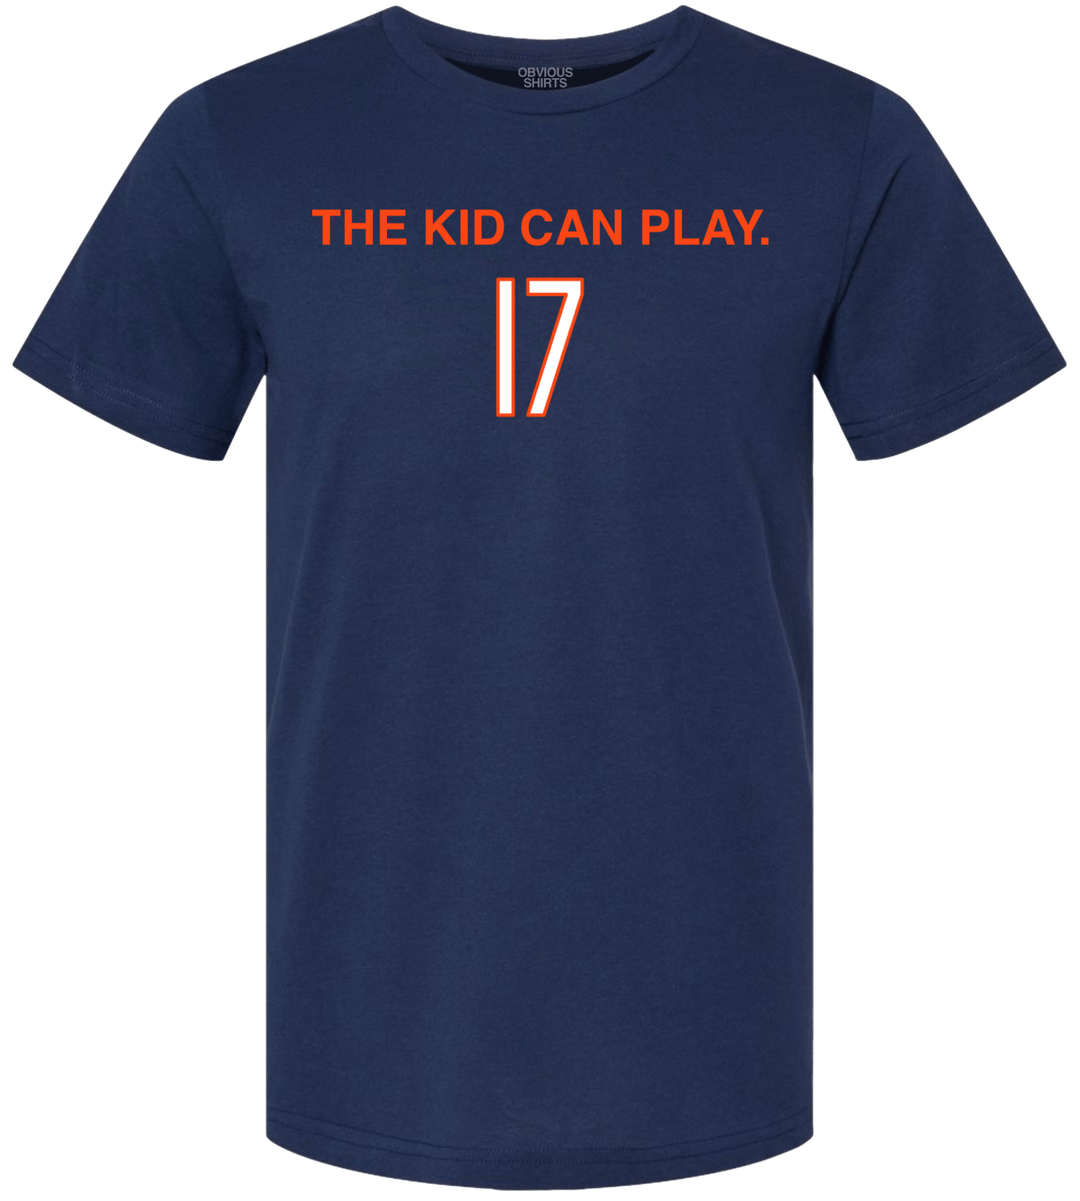 THE KID CAN PLAY. - OBVIOUS SHIRTS